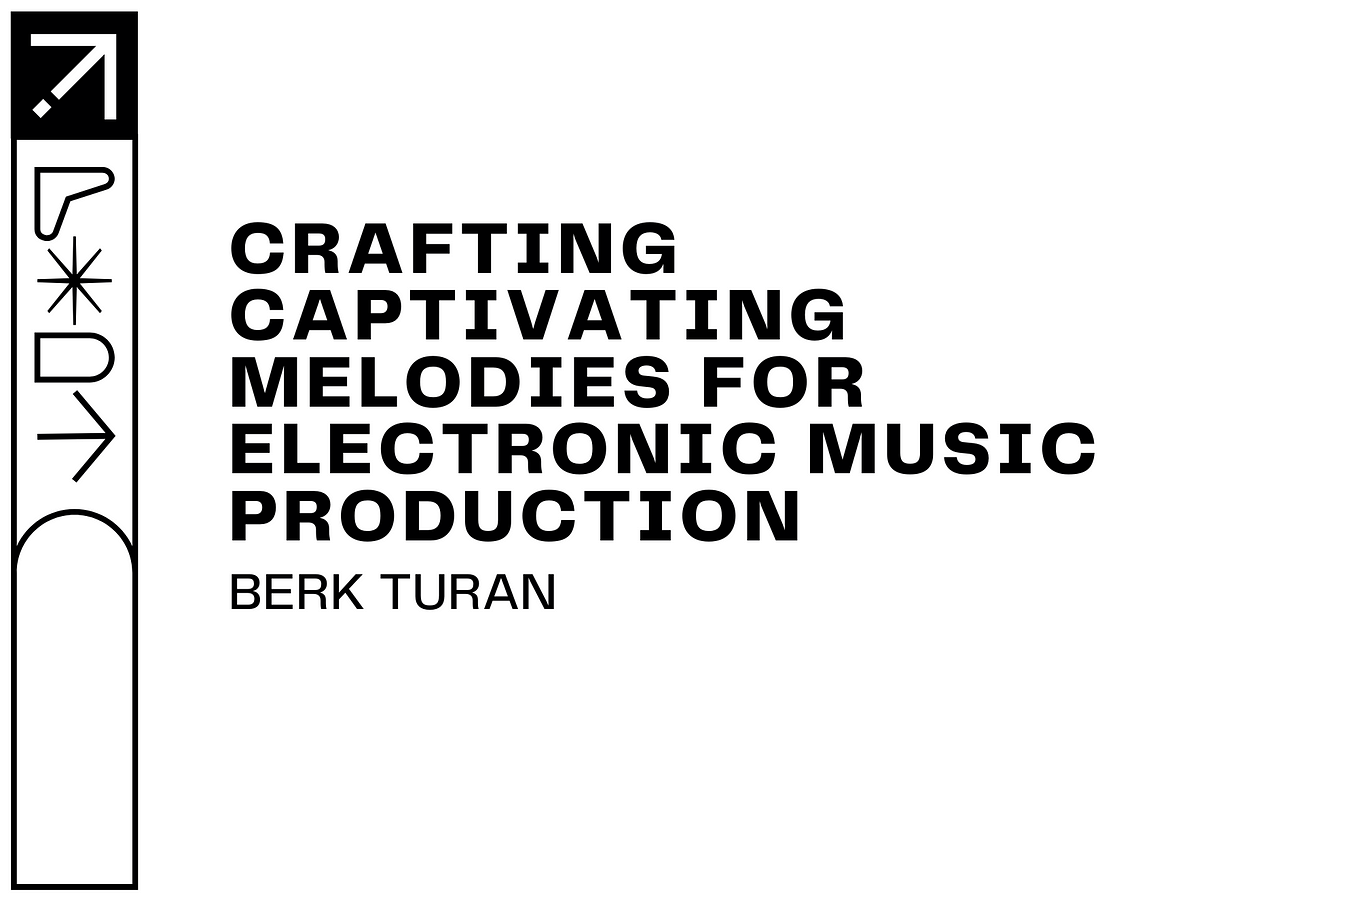 Crafting Captivating Melodies for Electronic Music Production